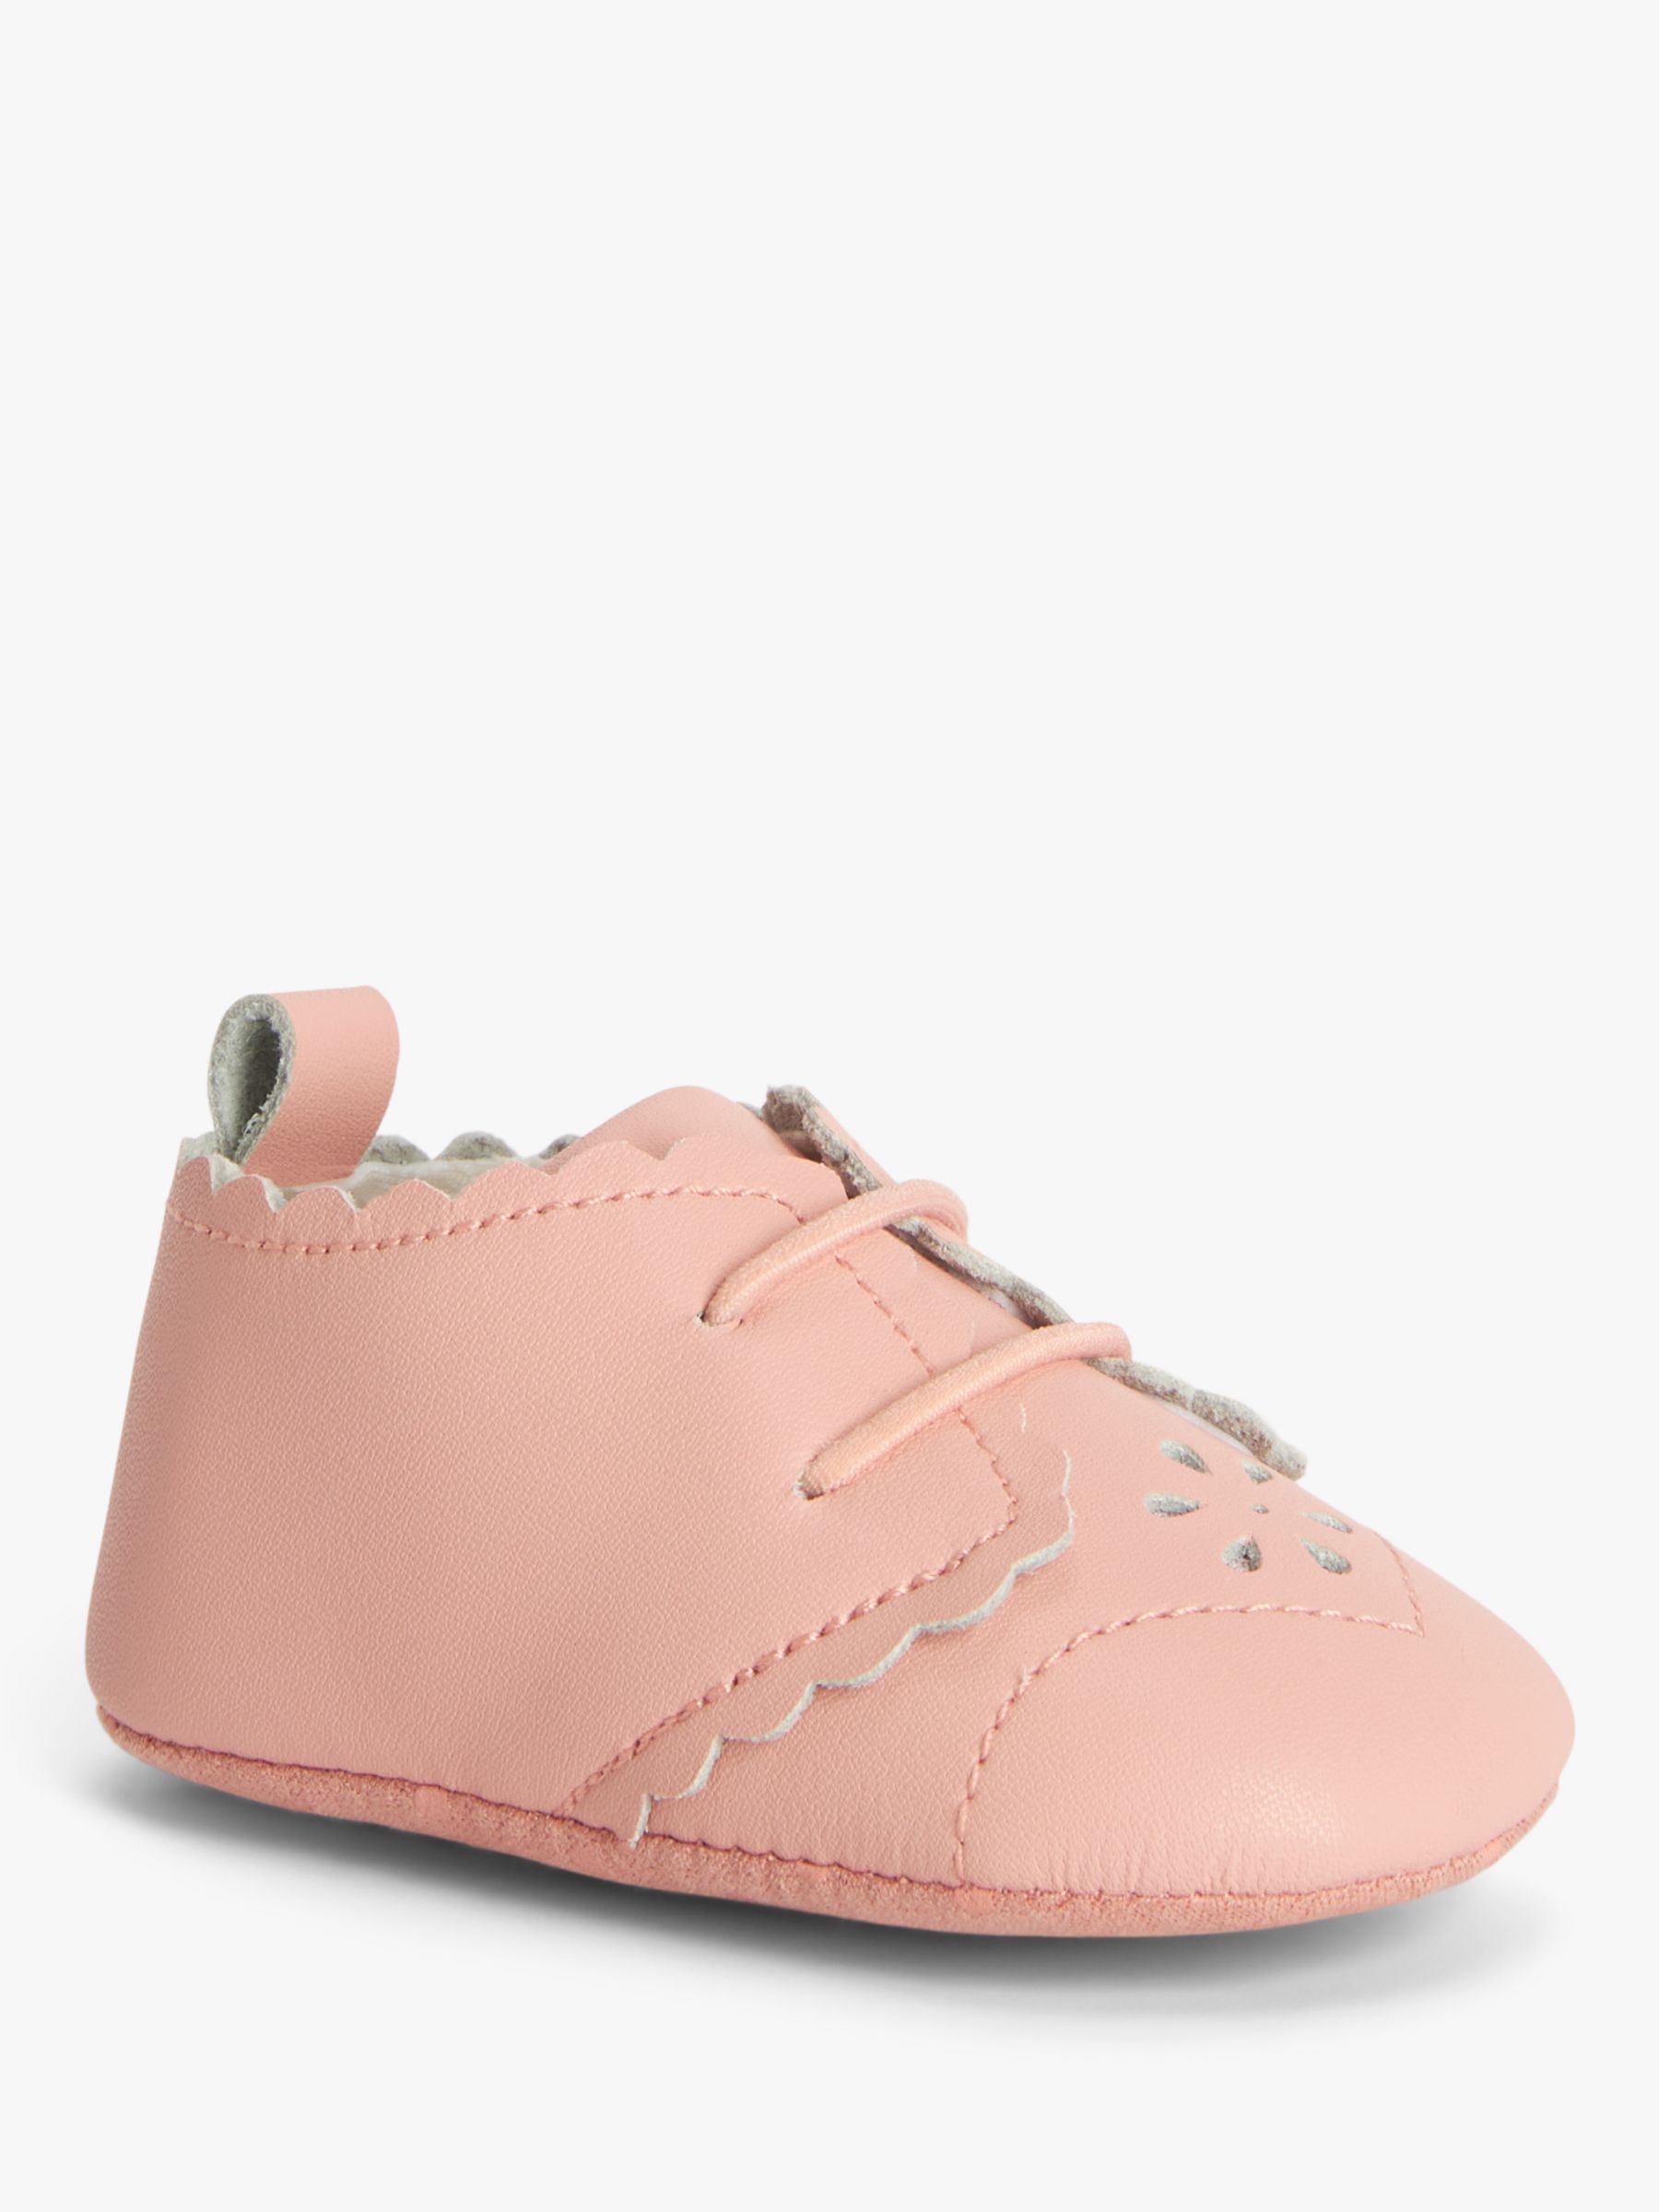 John Lewis Baby Cut-Out Floral Leather Pram Shoes, Pink, 6-12 months